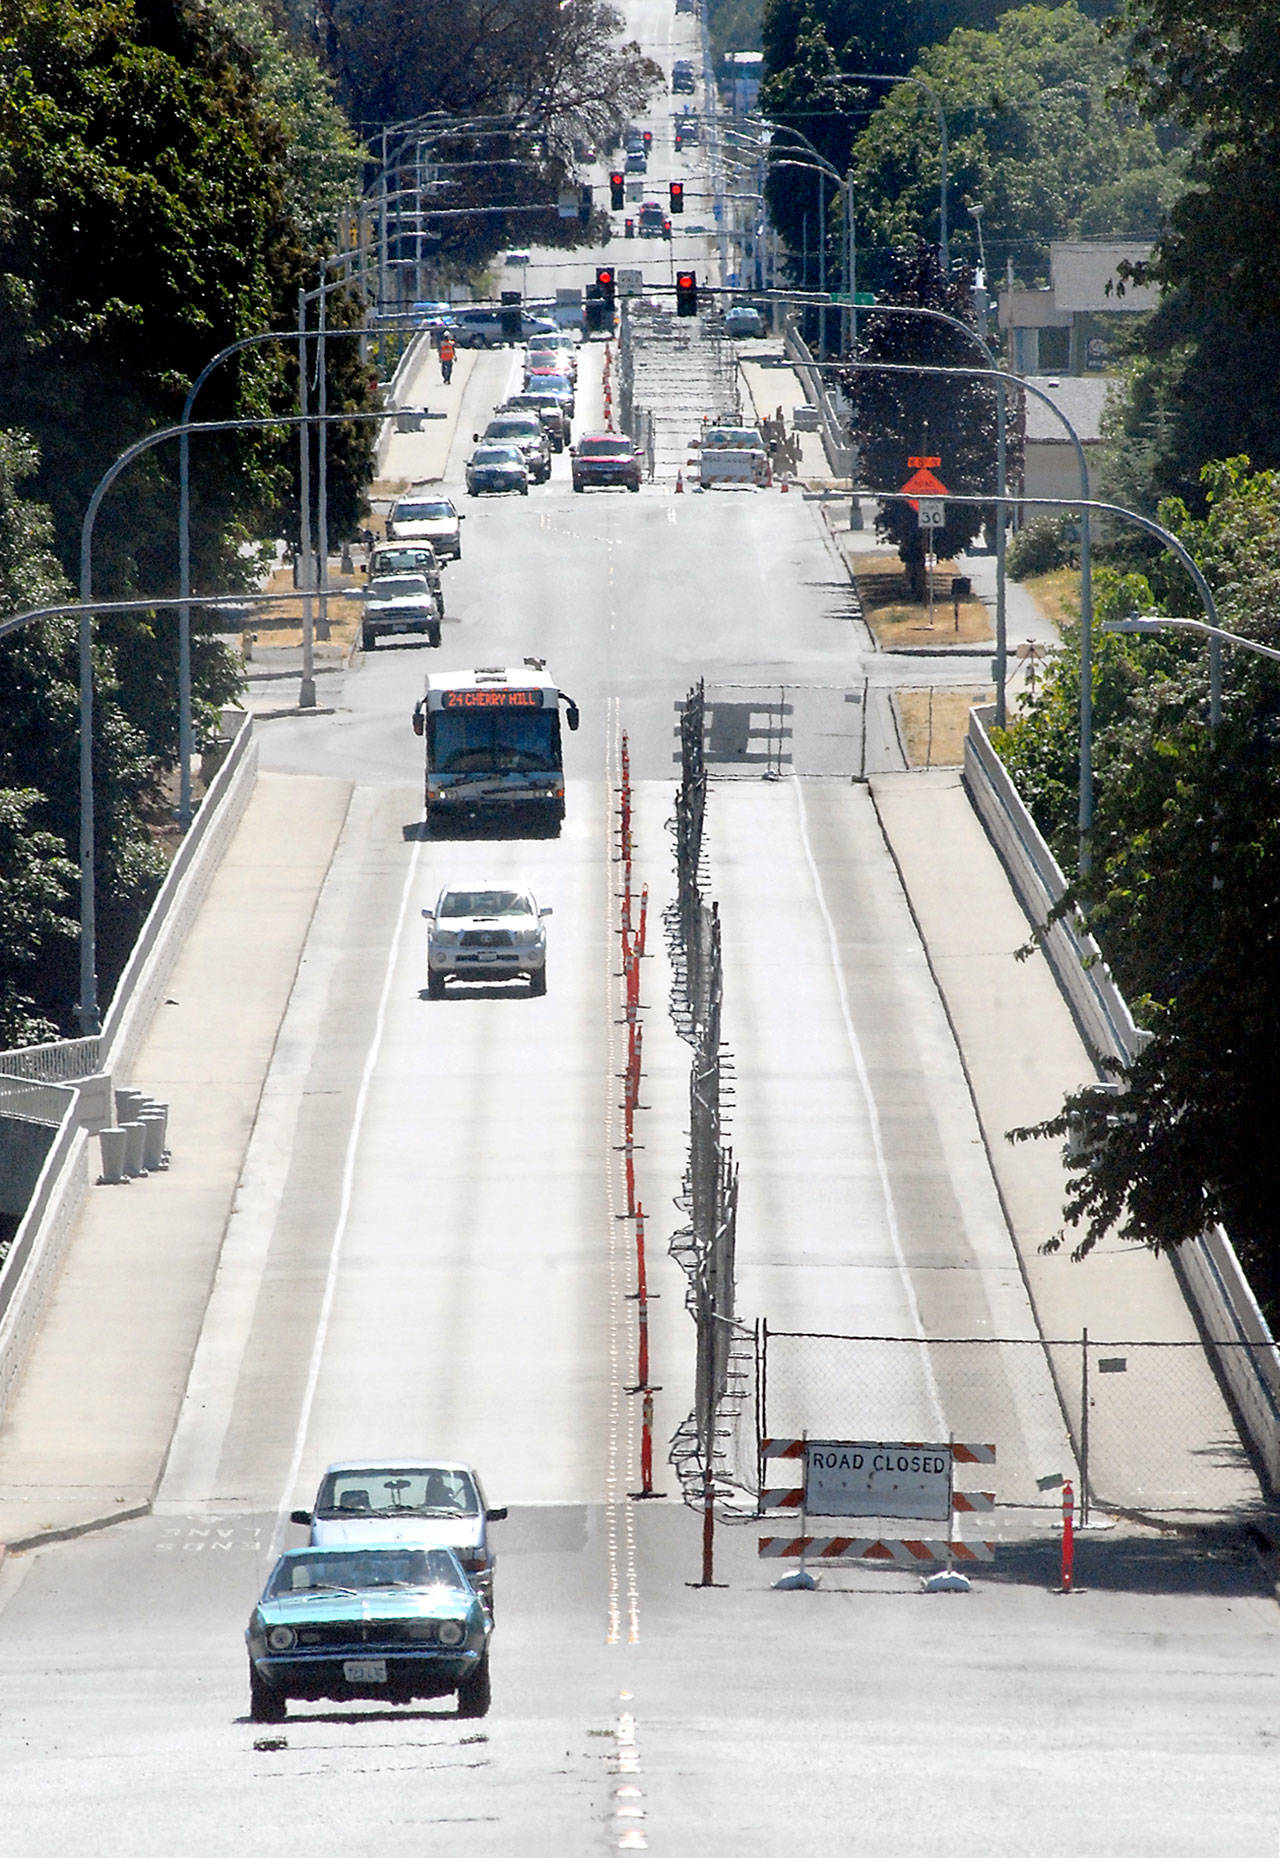 Construction fencing and traffic cones mark lane closures on the Eighth Street bridges over Tumwater and Valley creeks in Port Angeles on Thursday as crews prepare to install new railings on the spans. (Keith Thorpe/Peninsula Daily News)